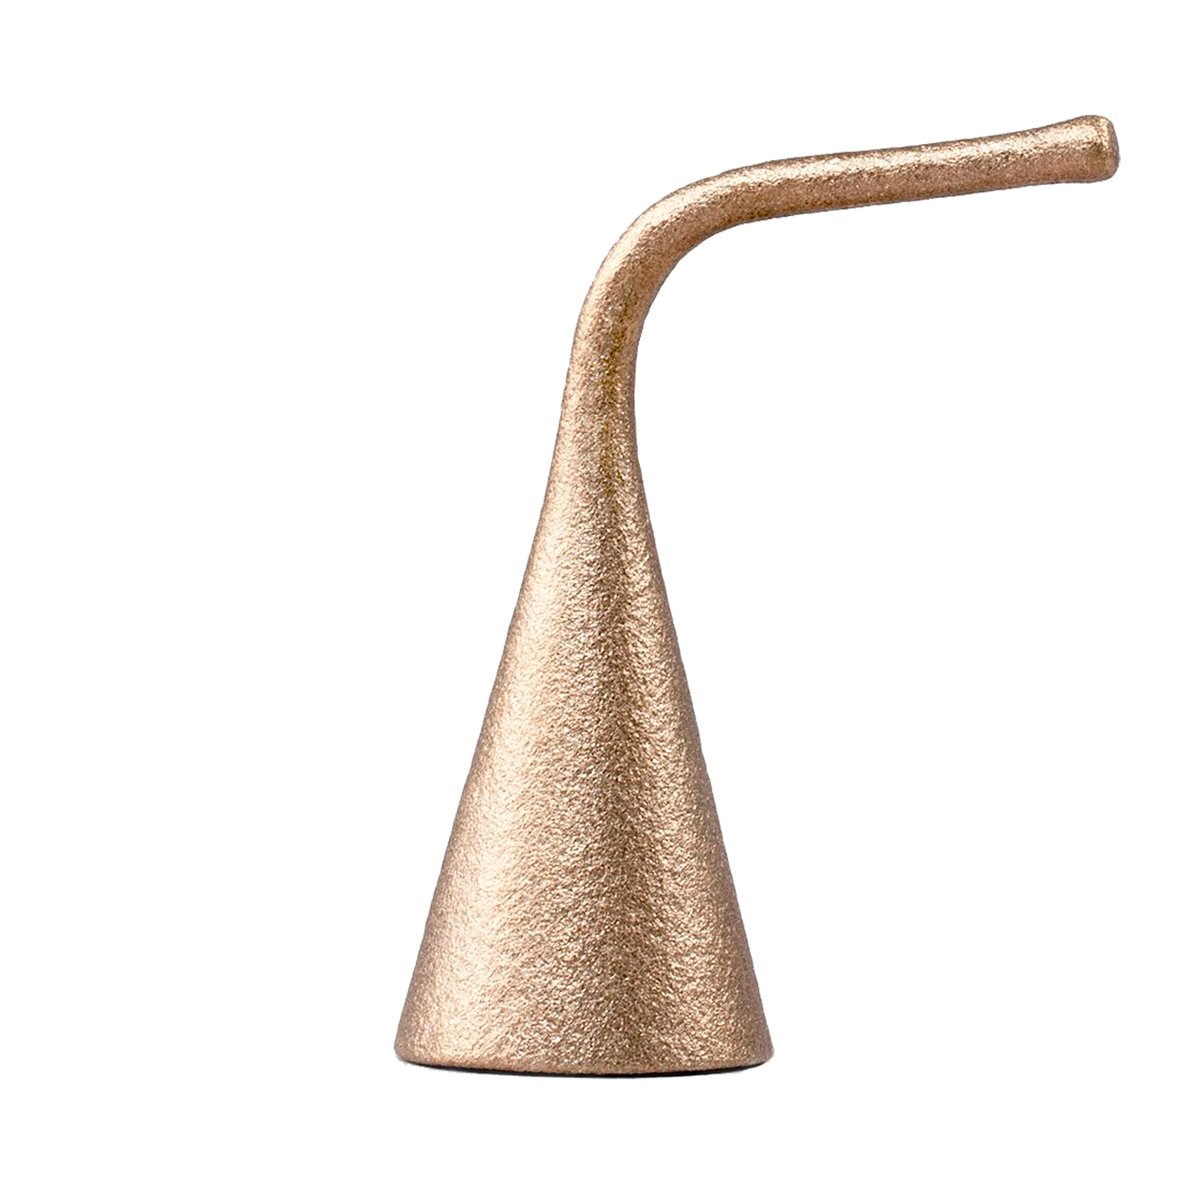 Details about   BOMBAY CO CANDLE SNUFFER STAINLESS 